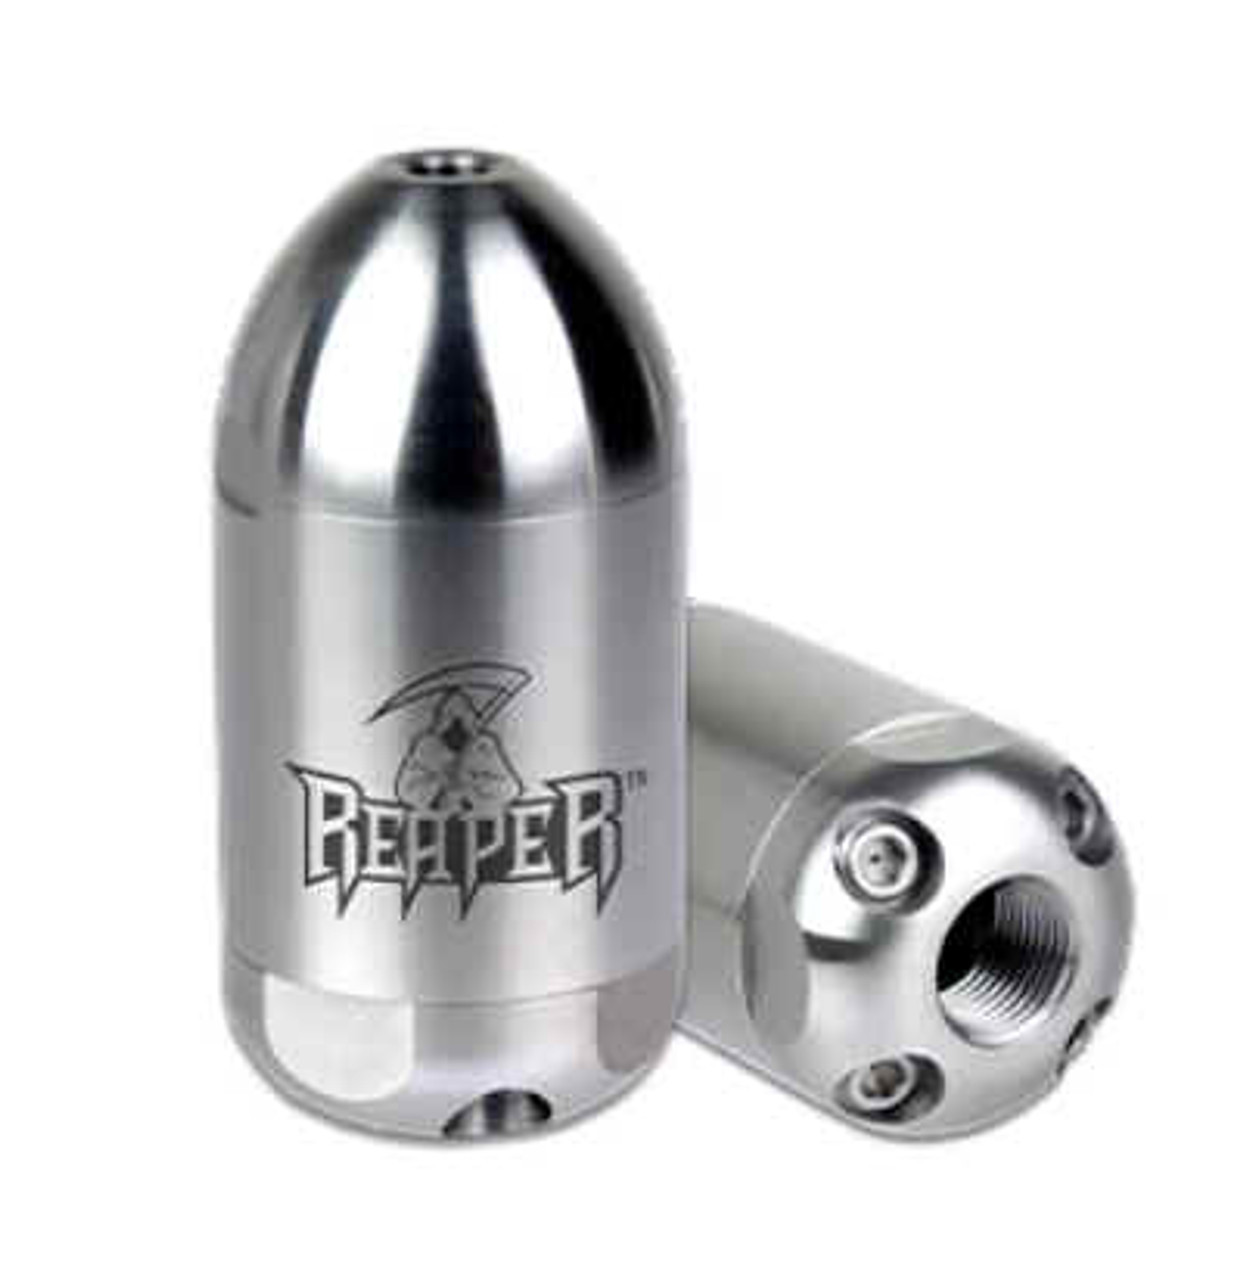 Reaper 1/2" BSPP Rotating Jetting Nozzle - 15.0